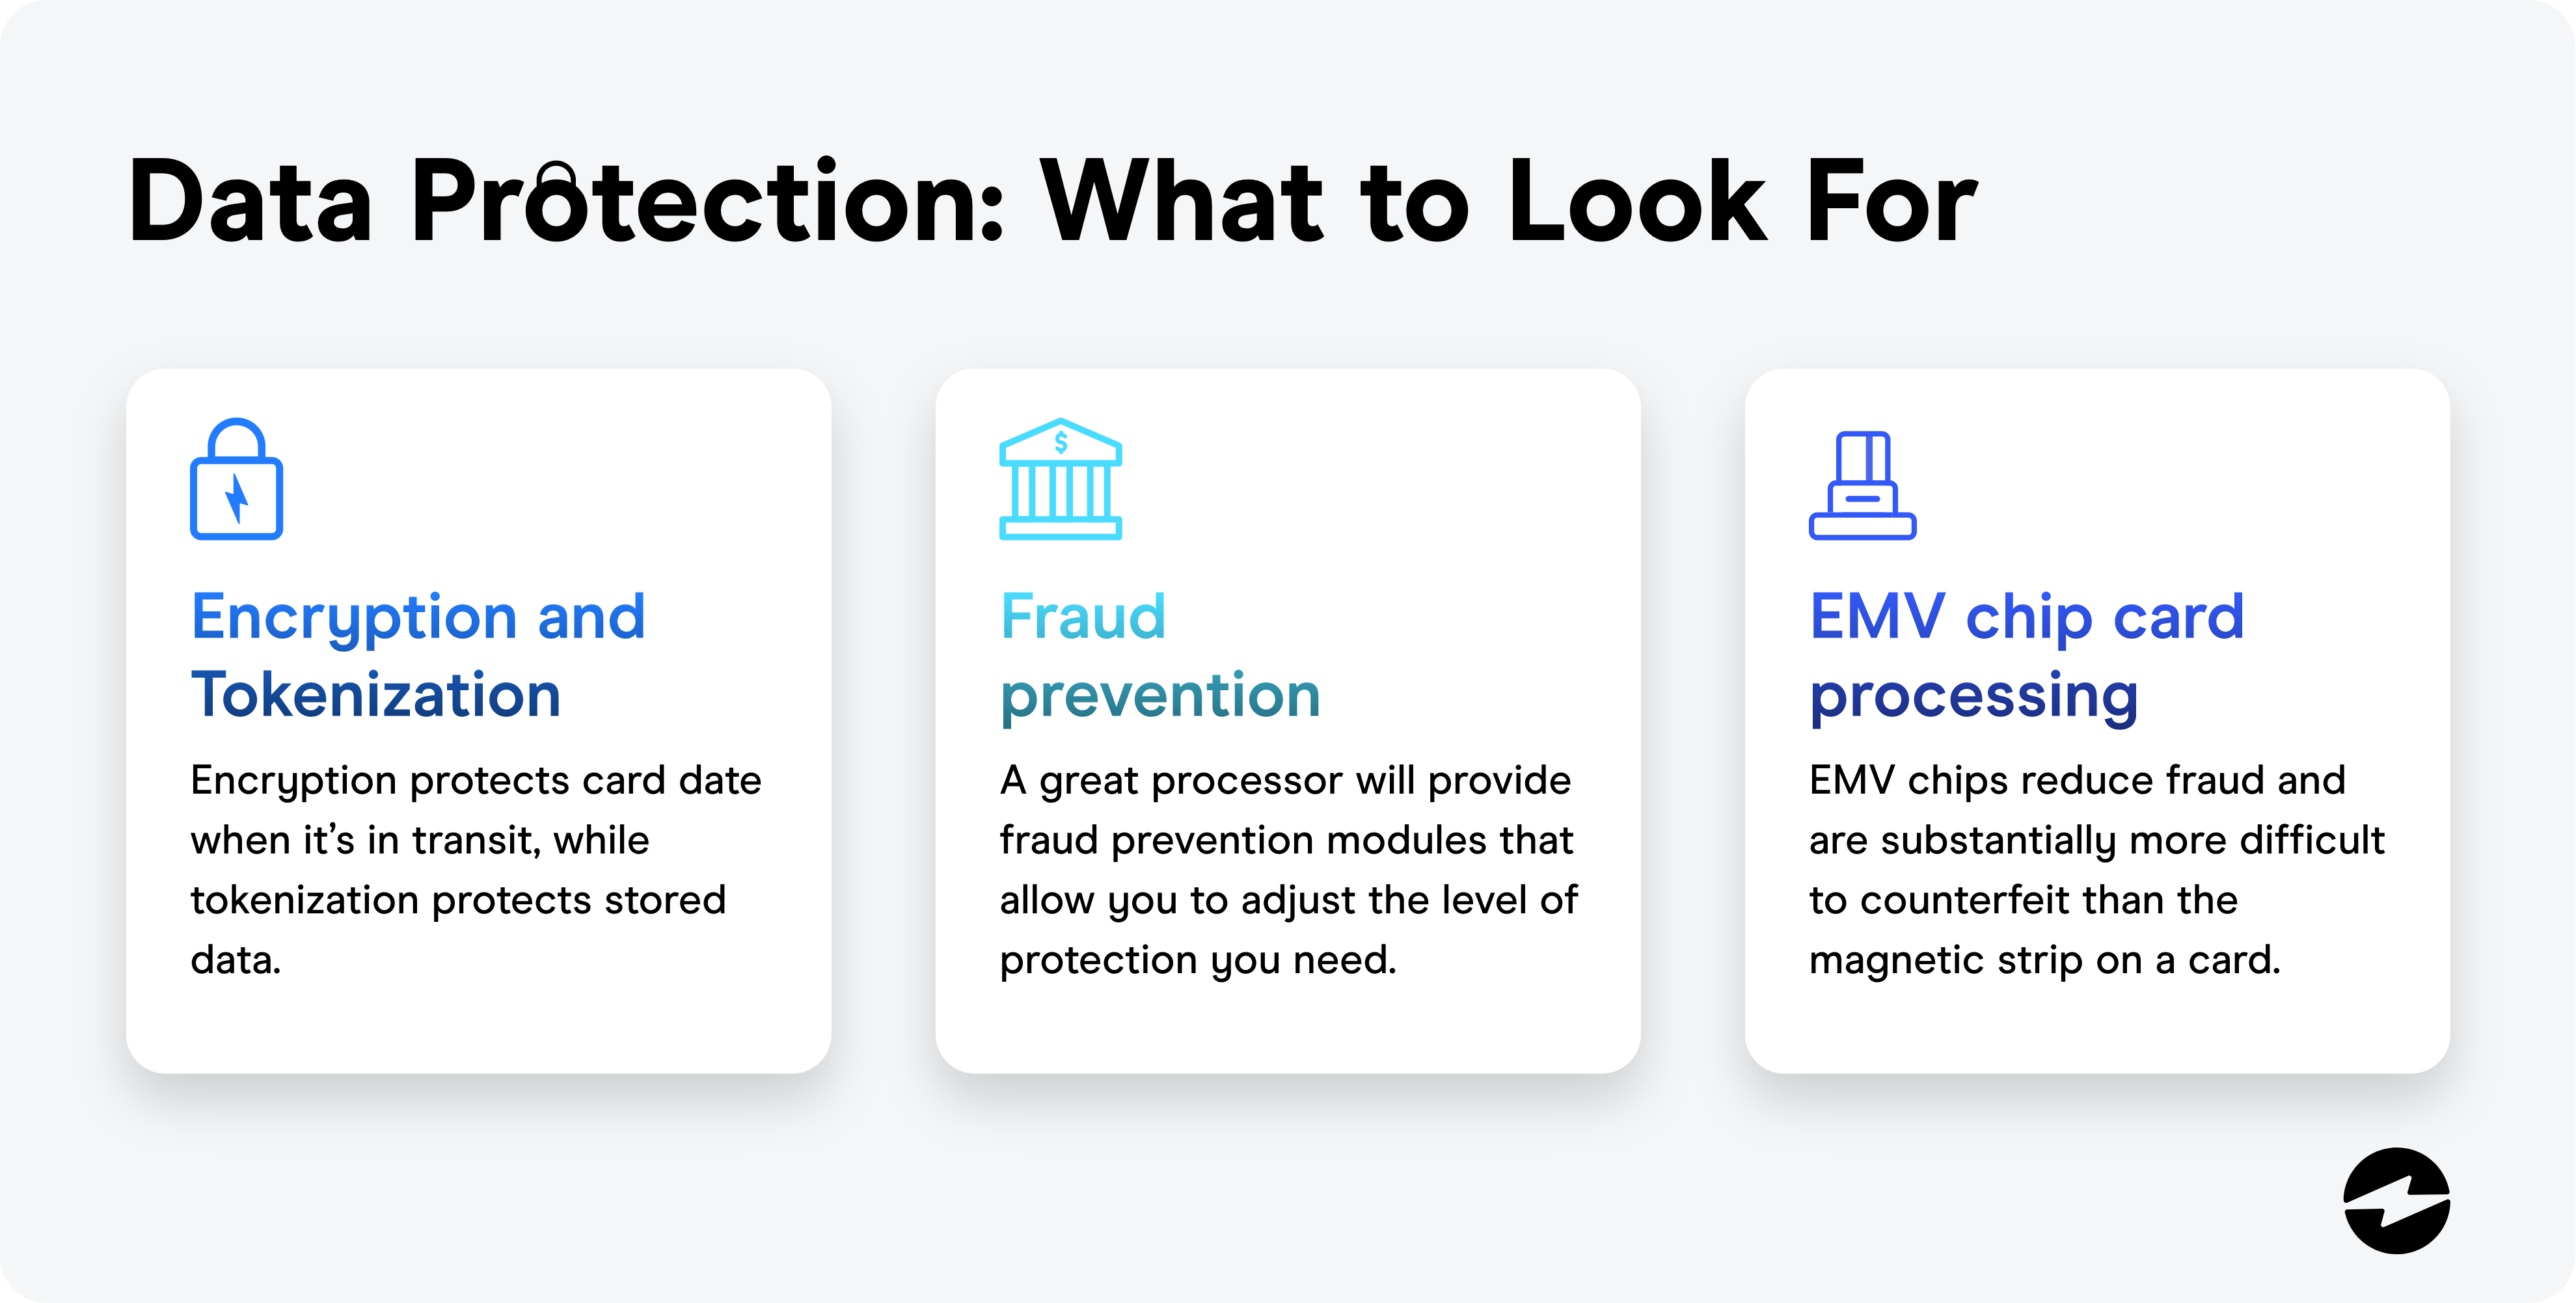 Key Data Protection factors to look for